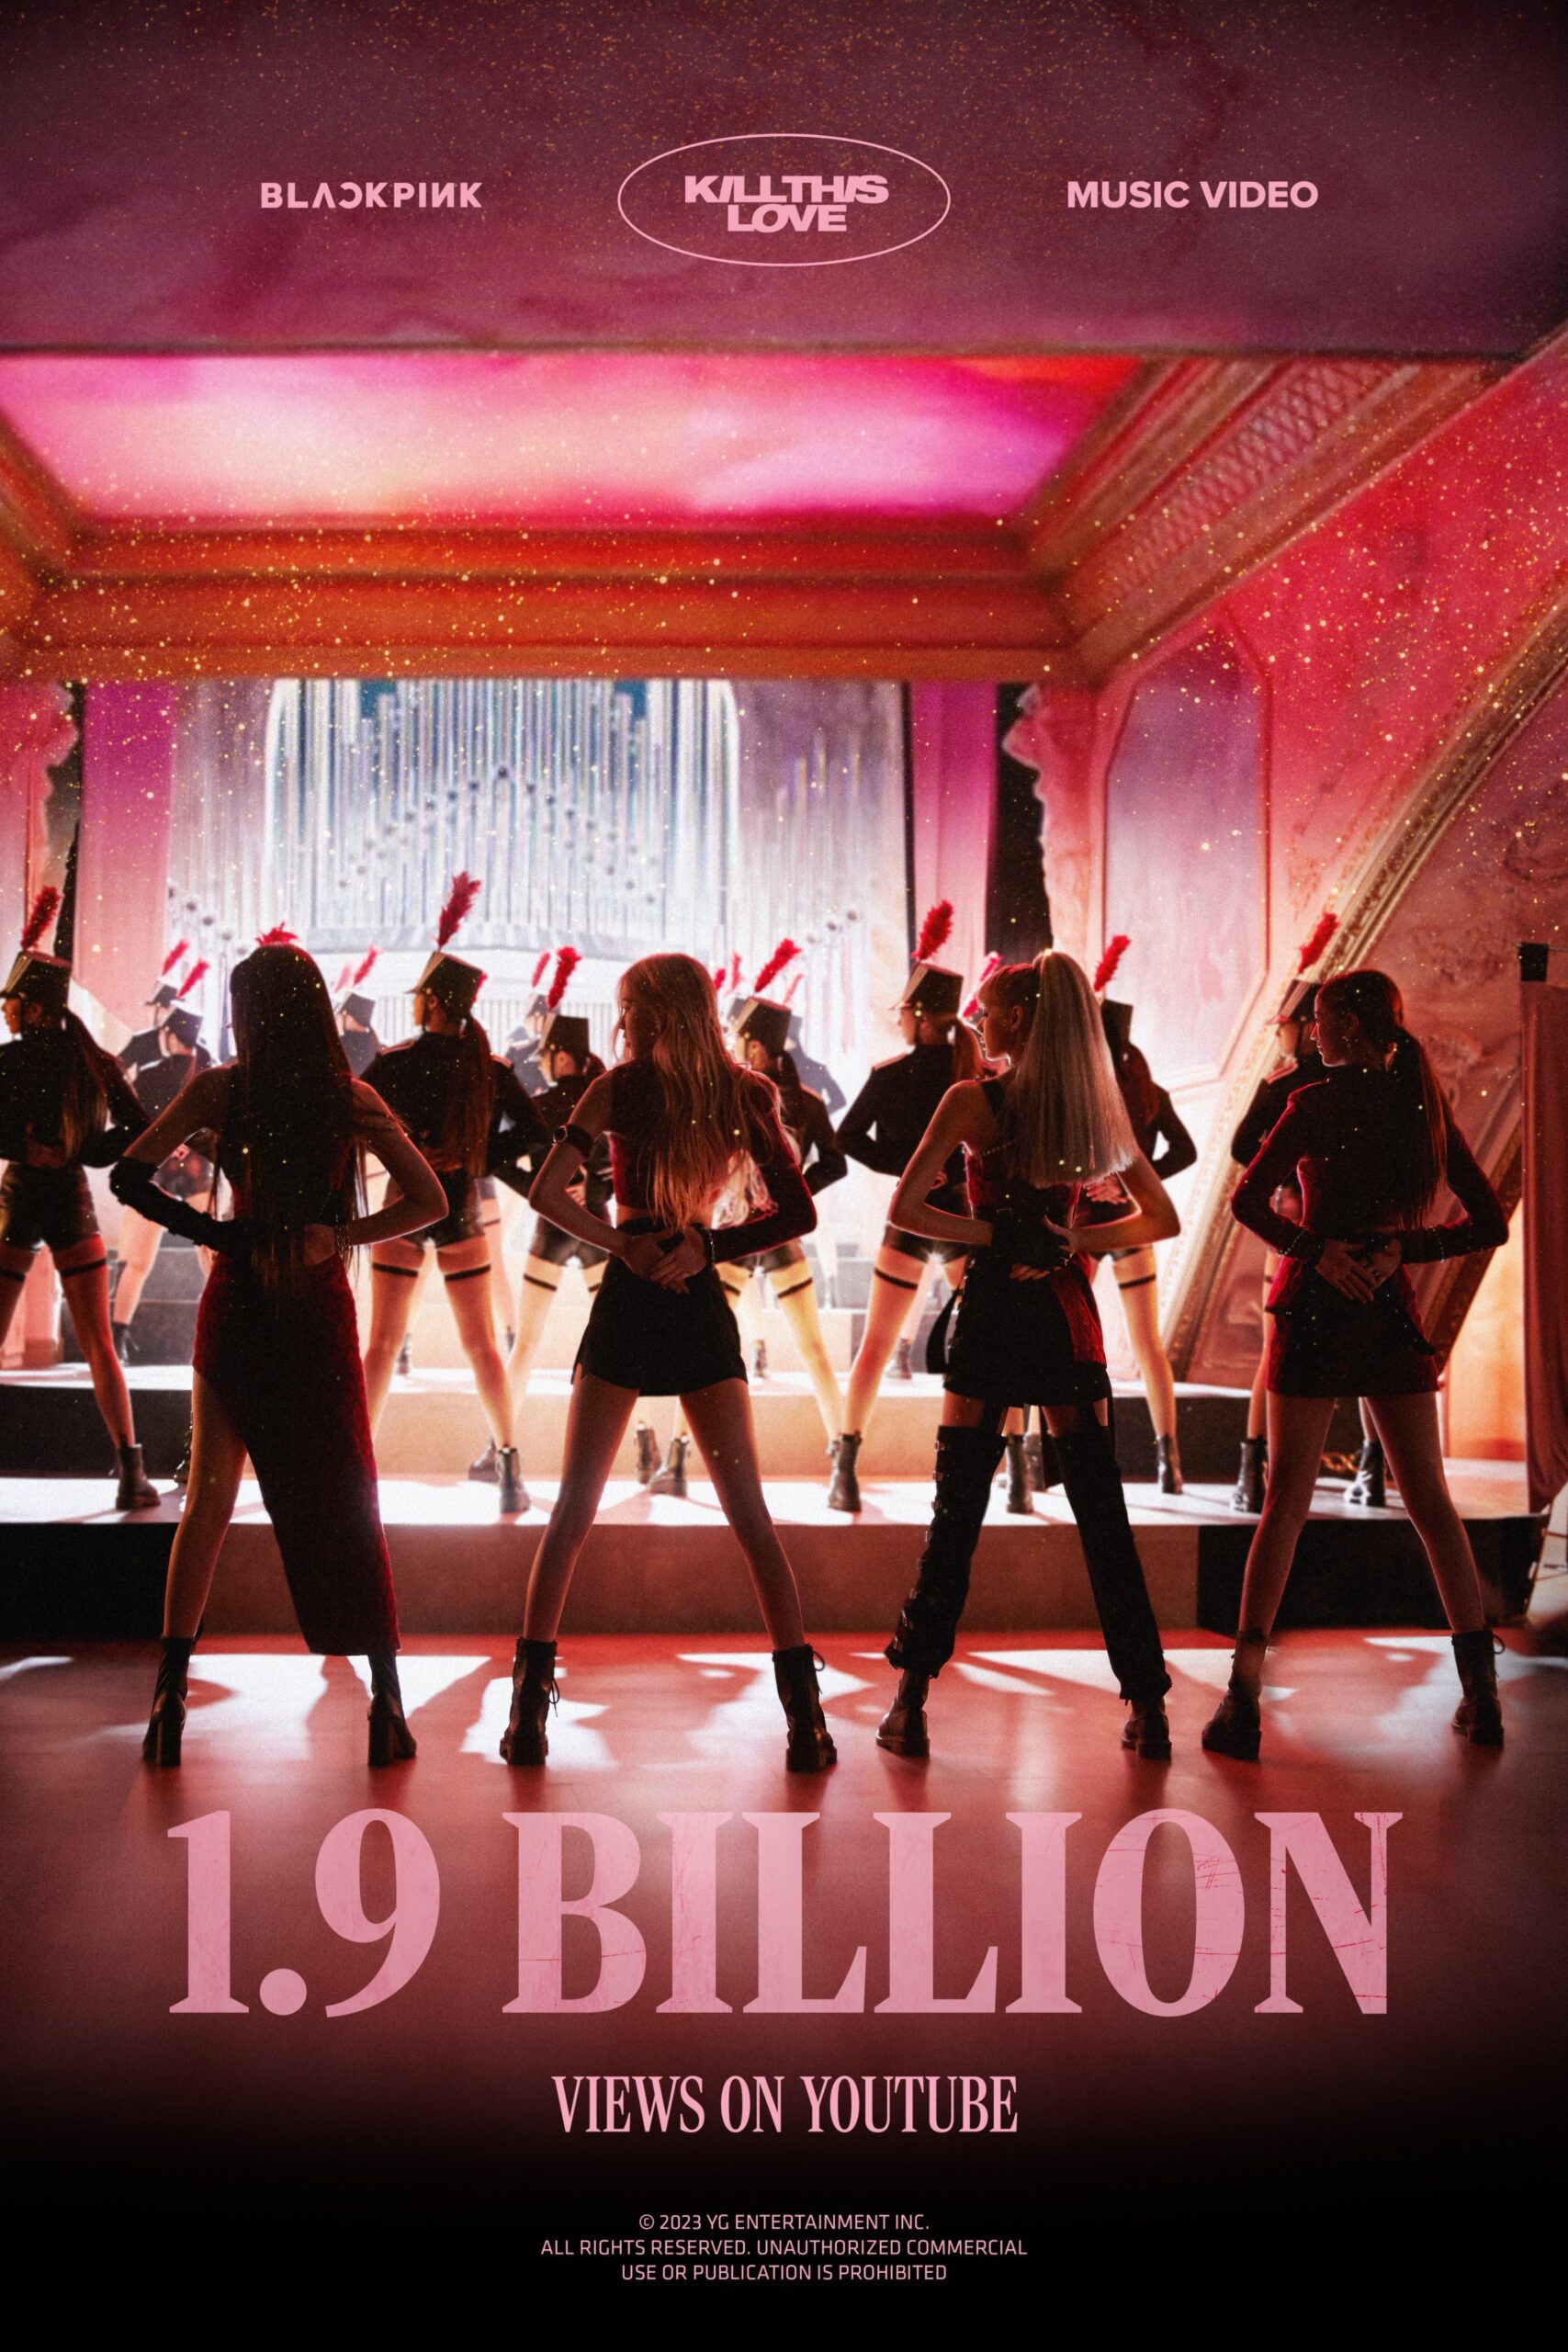 231204 BLACKPINK - ‘Kill This Love’ M/V hits 1.9 BILLION VIEWS on Youtube! [Official Poster]